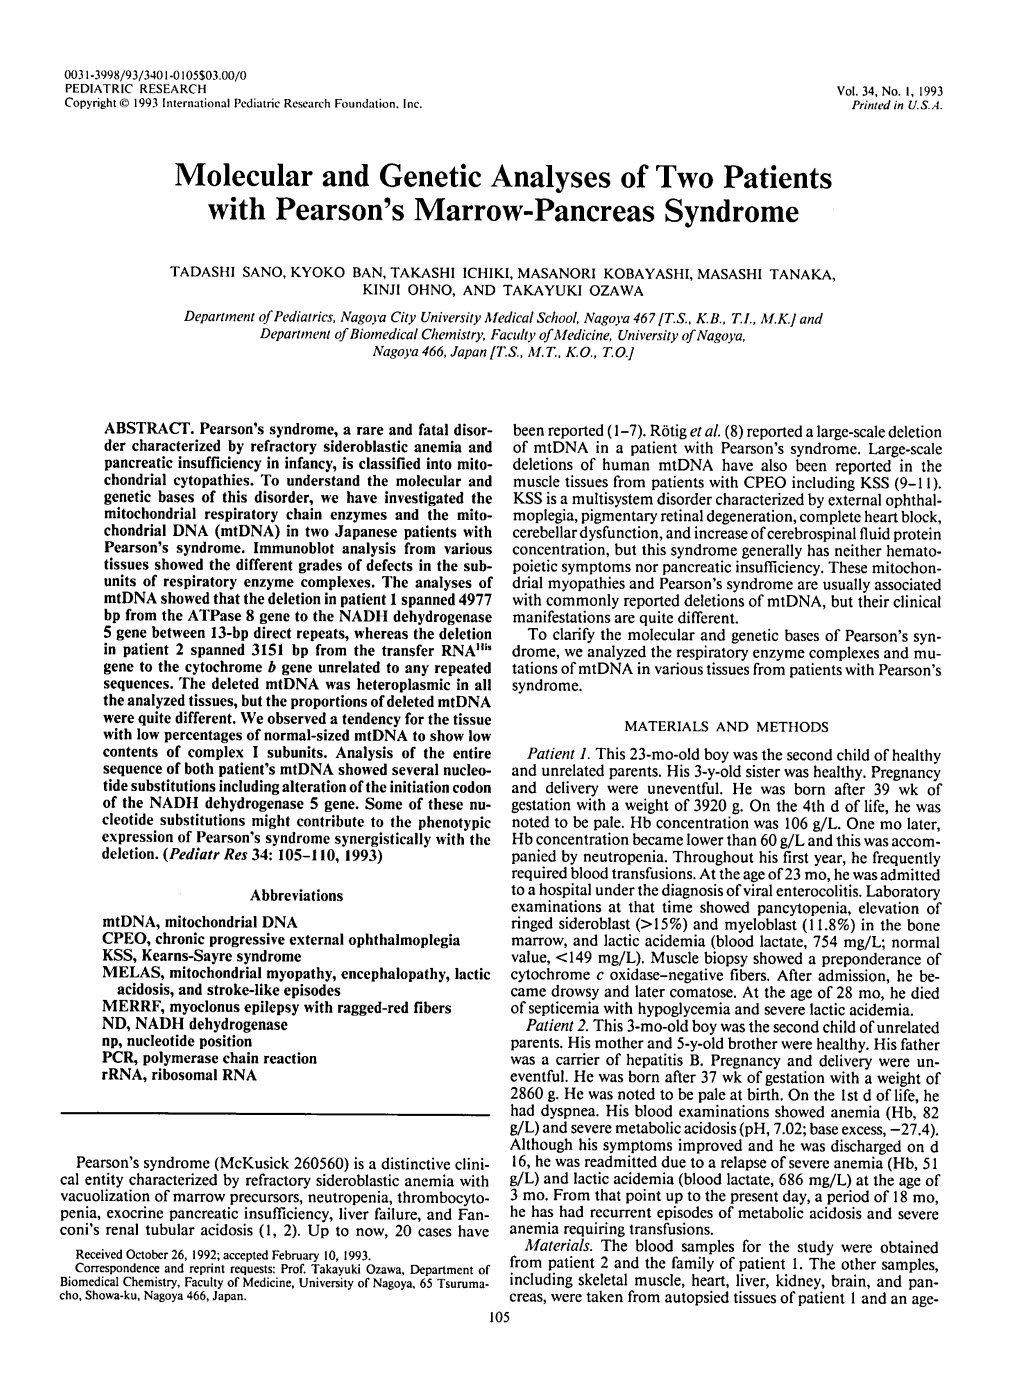 Molecular and Genetic Analyses of Two Patients with Pearson's Marrow-Pancreas Syndrome